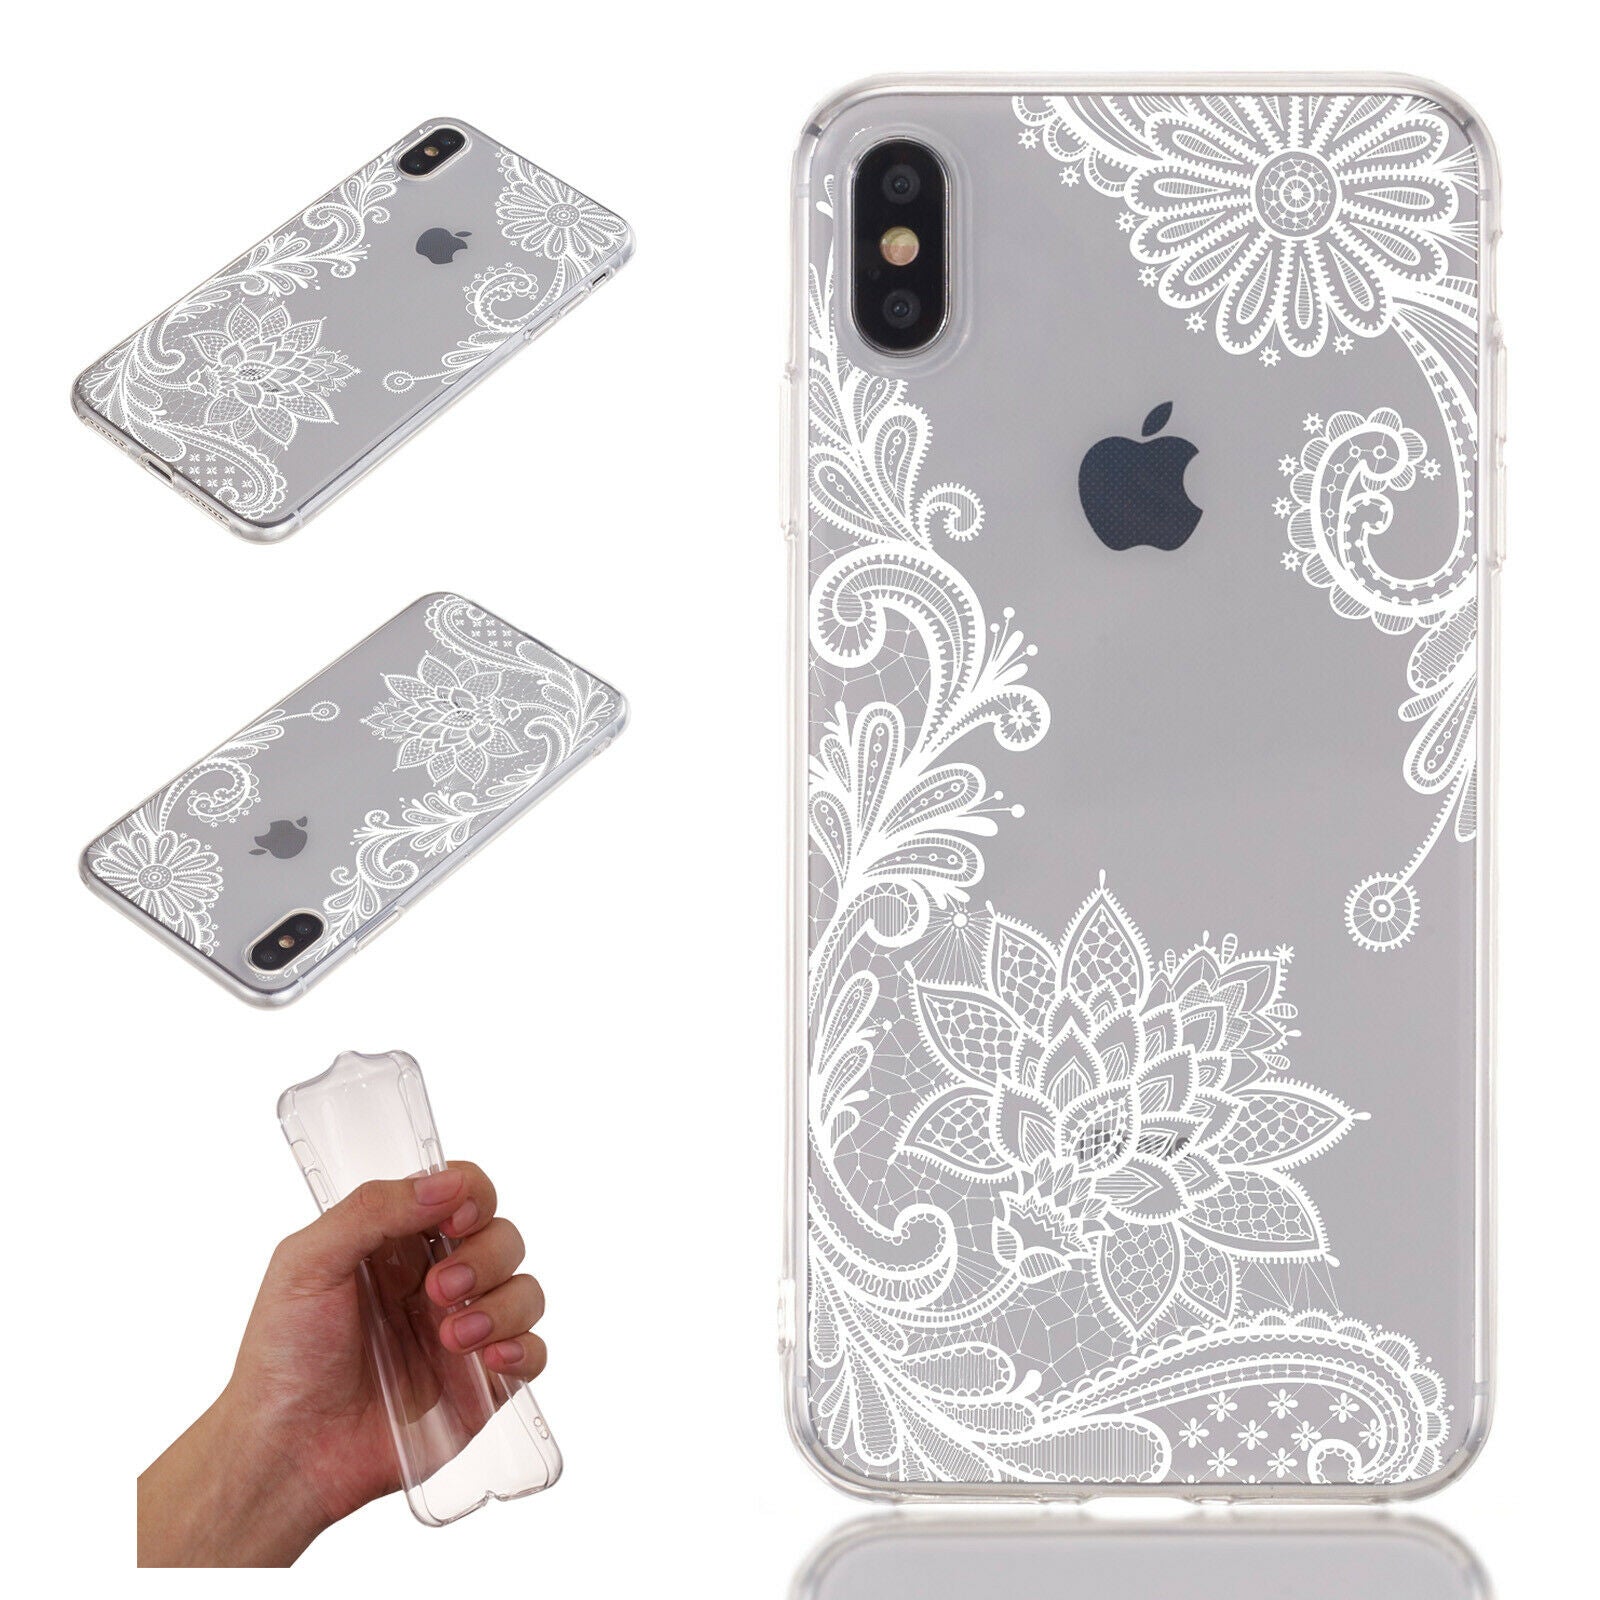 Flower Pattern Clear Soft Ultra Slim Back Case For iPhone - carolay.co